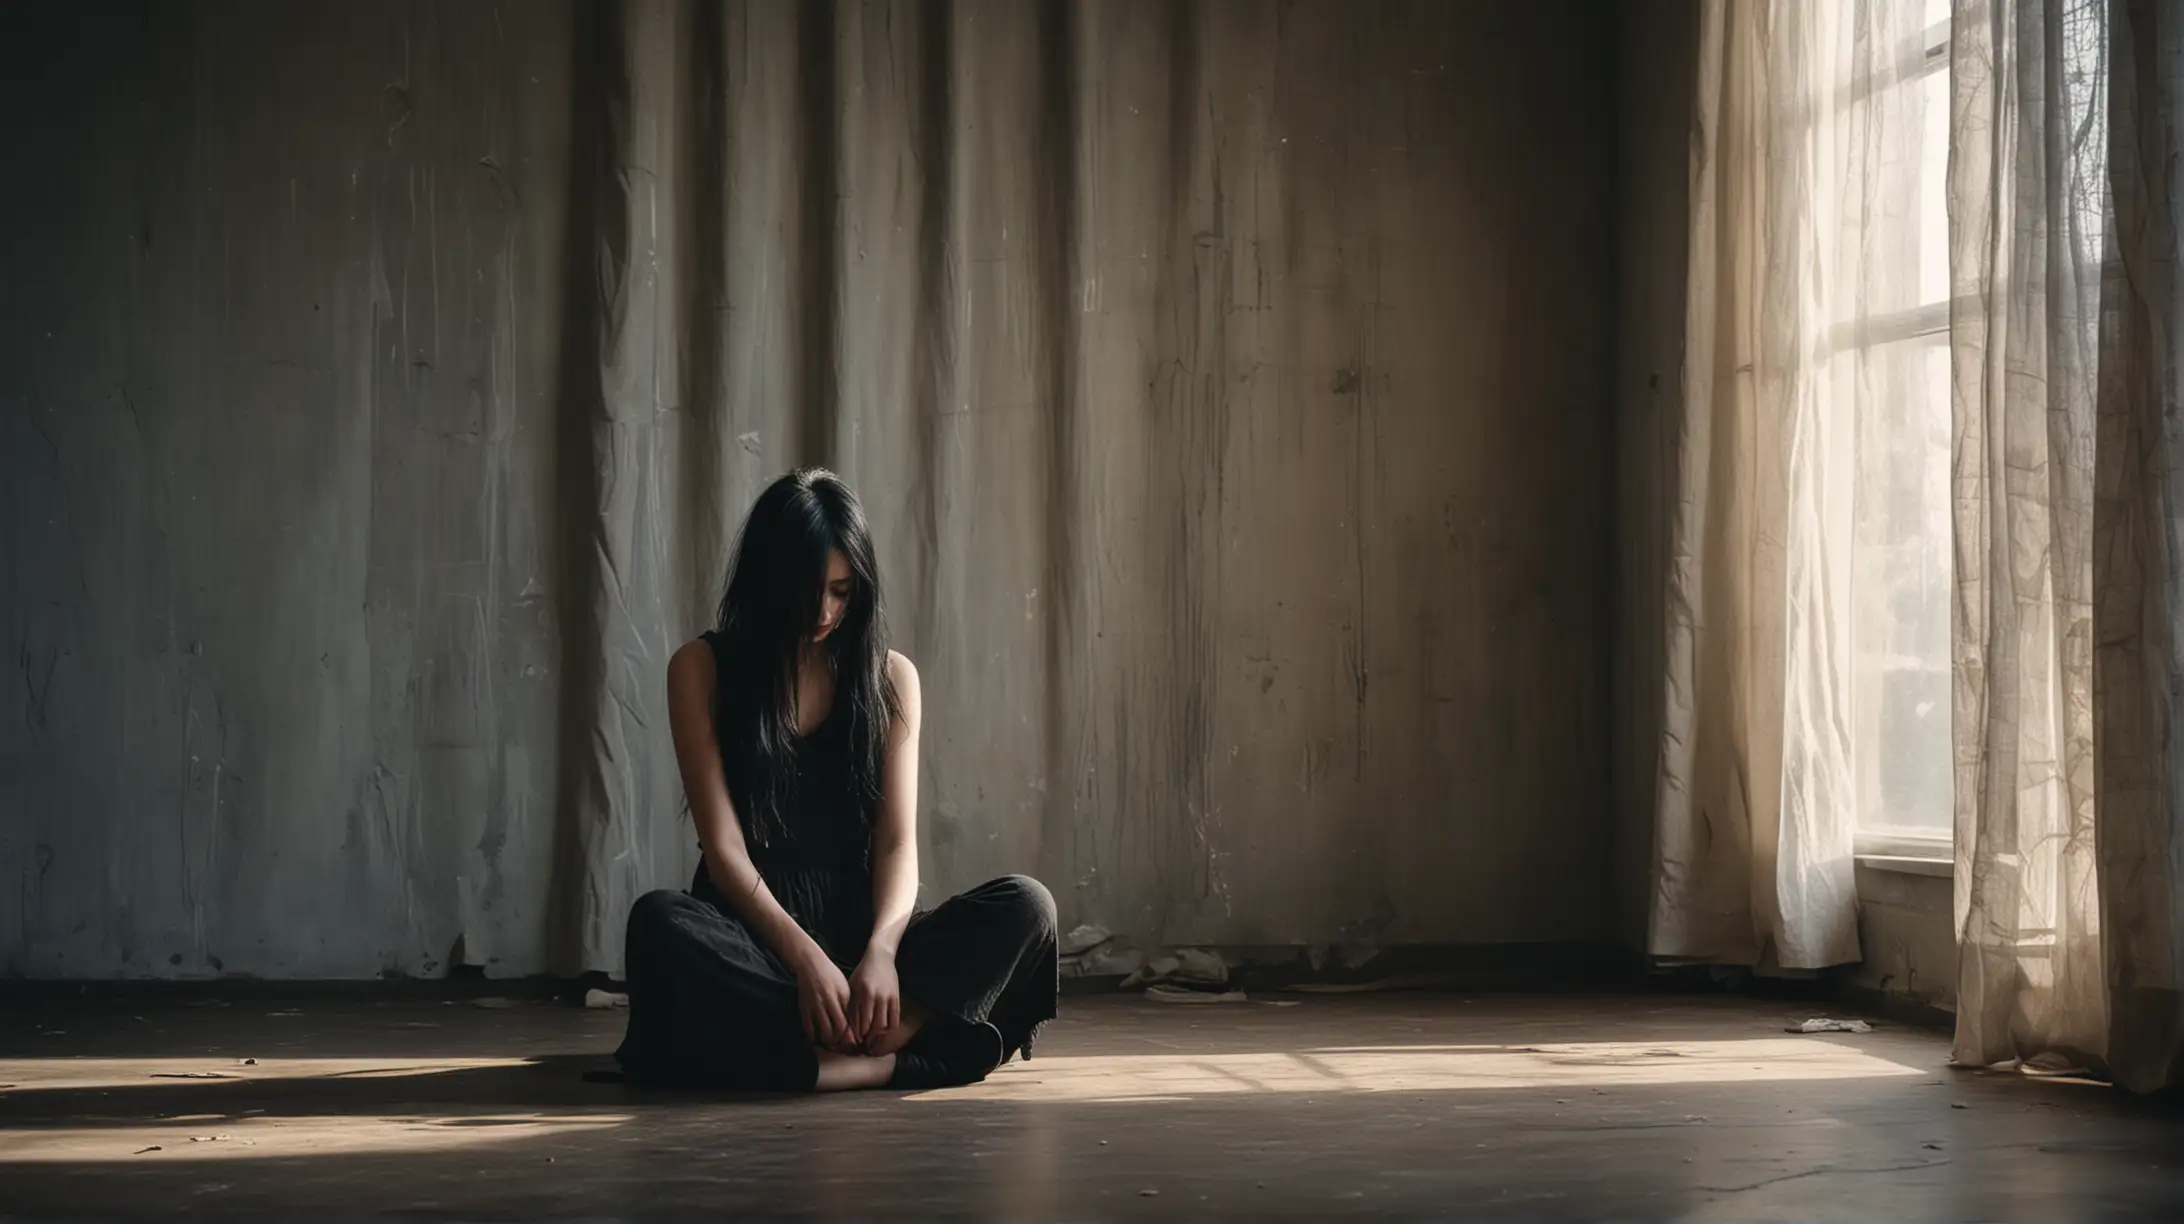 Lonely Girl with Black Hair in Grunge Room with Window Light